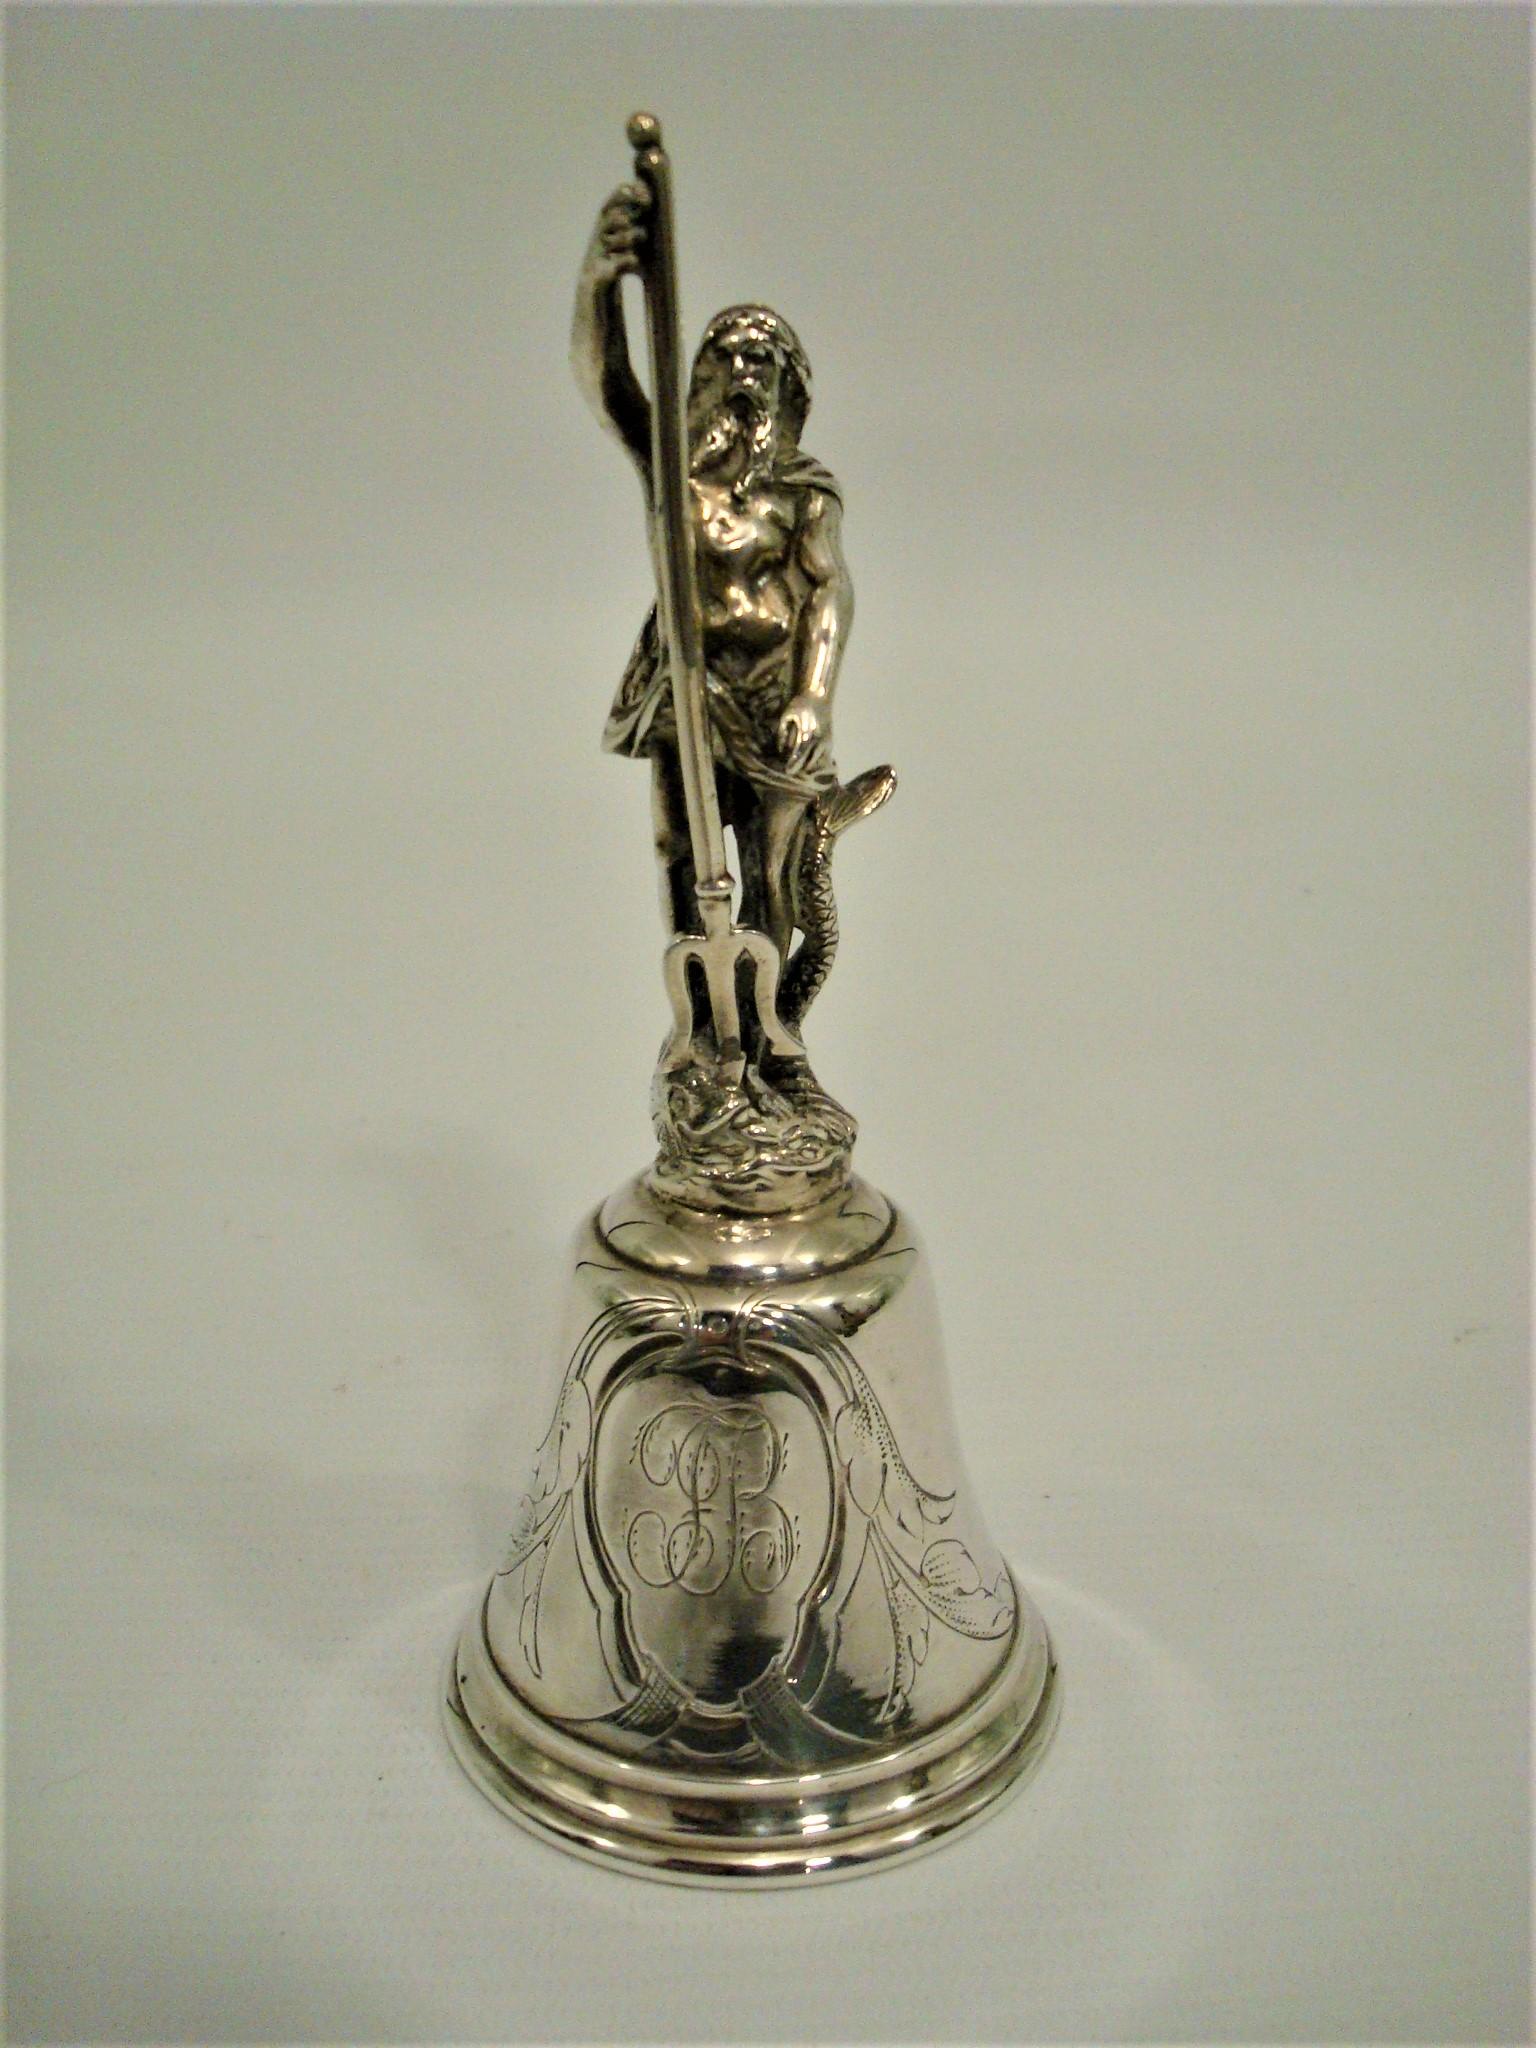 Antique French silver Neptune table bell, circa 1880.
The handle in the form of a Neptune standing with his trident and dolphin, on a domed decorated body.
Perfect gift for any Maritime or sailor fan.